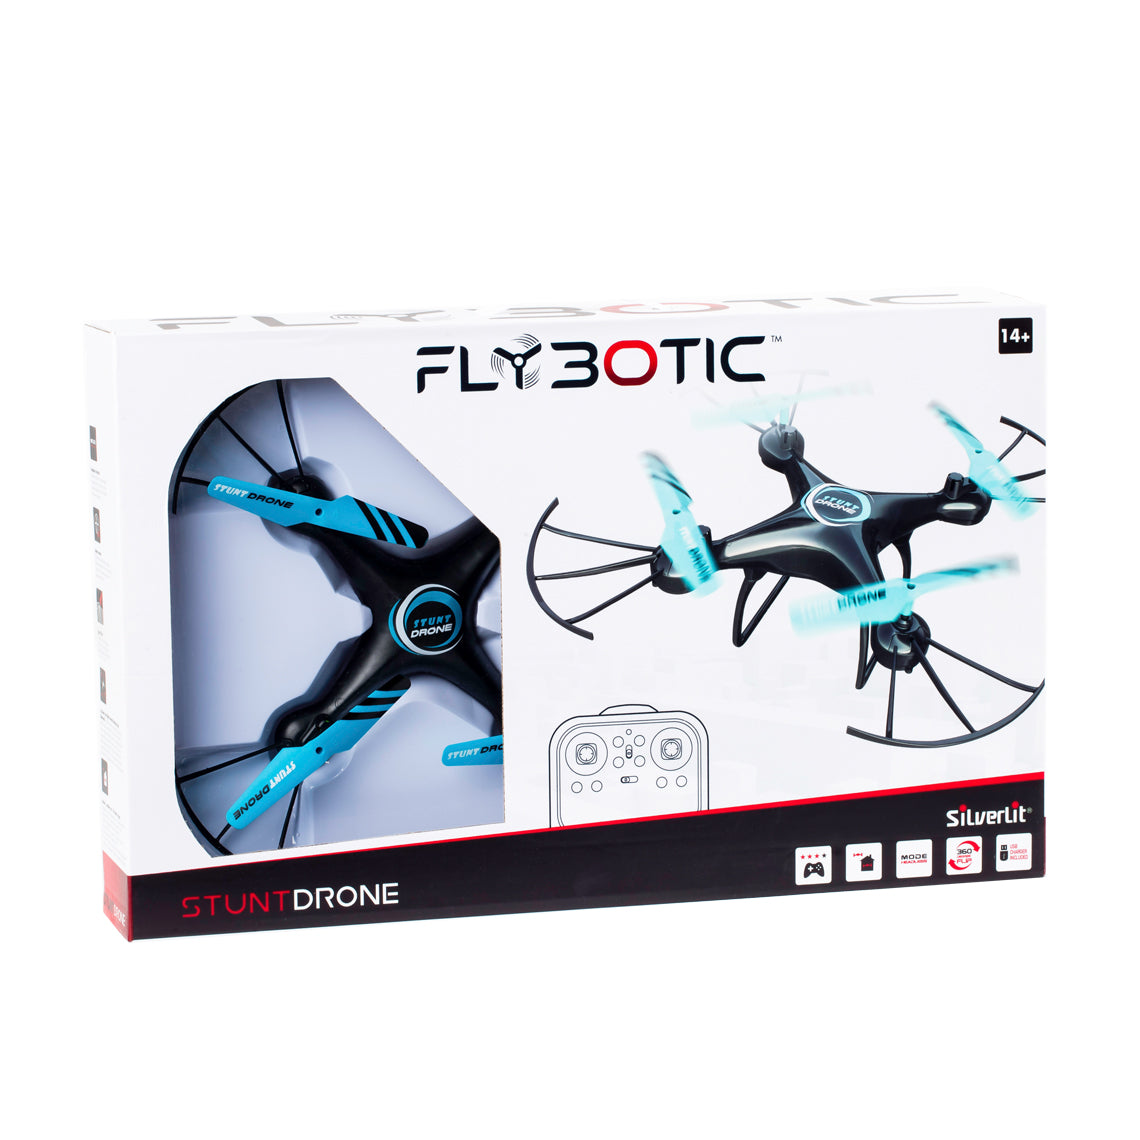 FLYBOTIC STUNT DRONE Demo Video By Silverlit Toys 